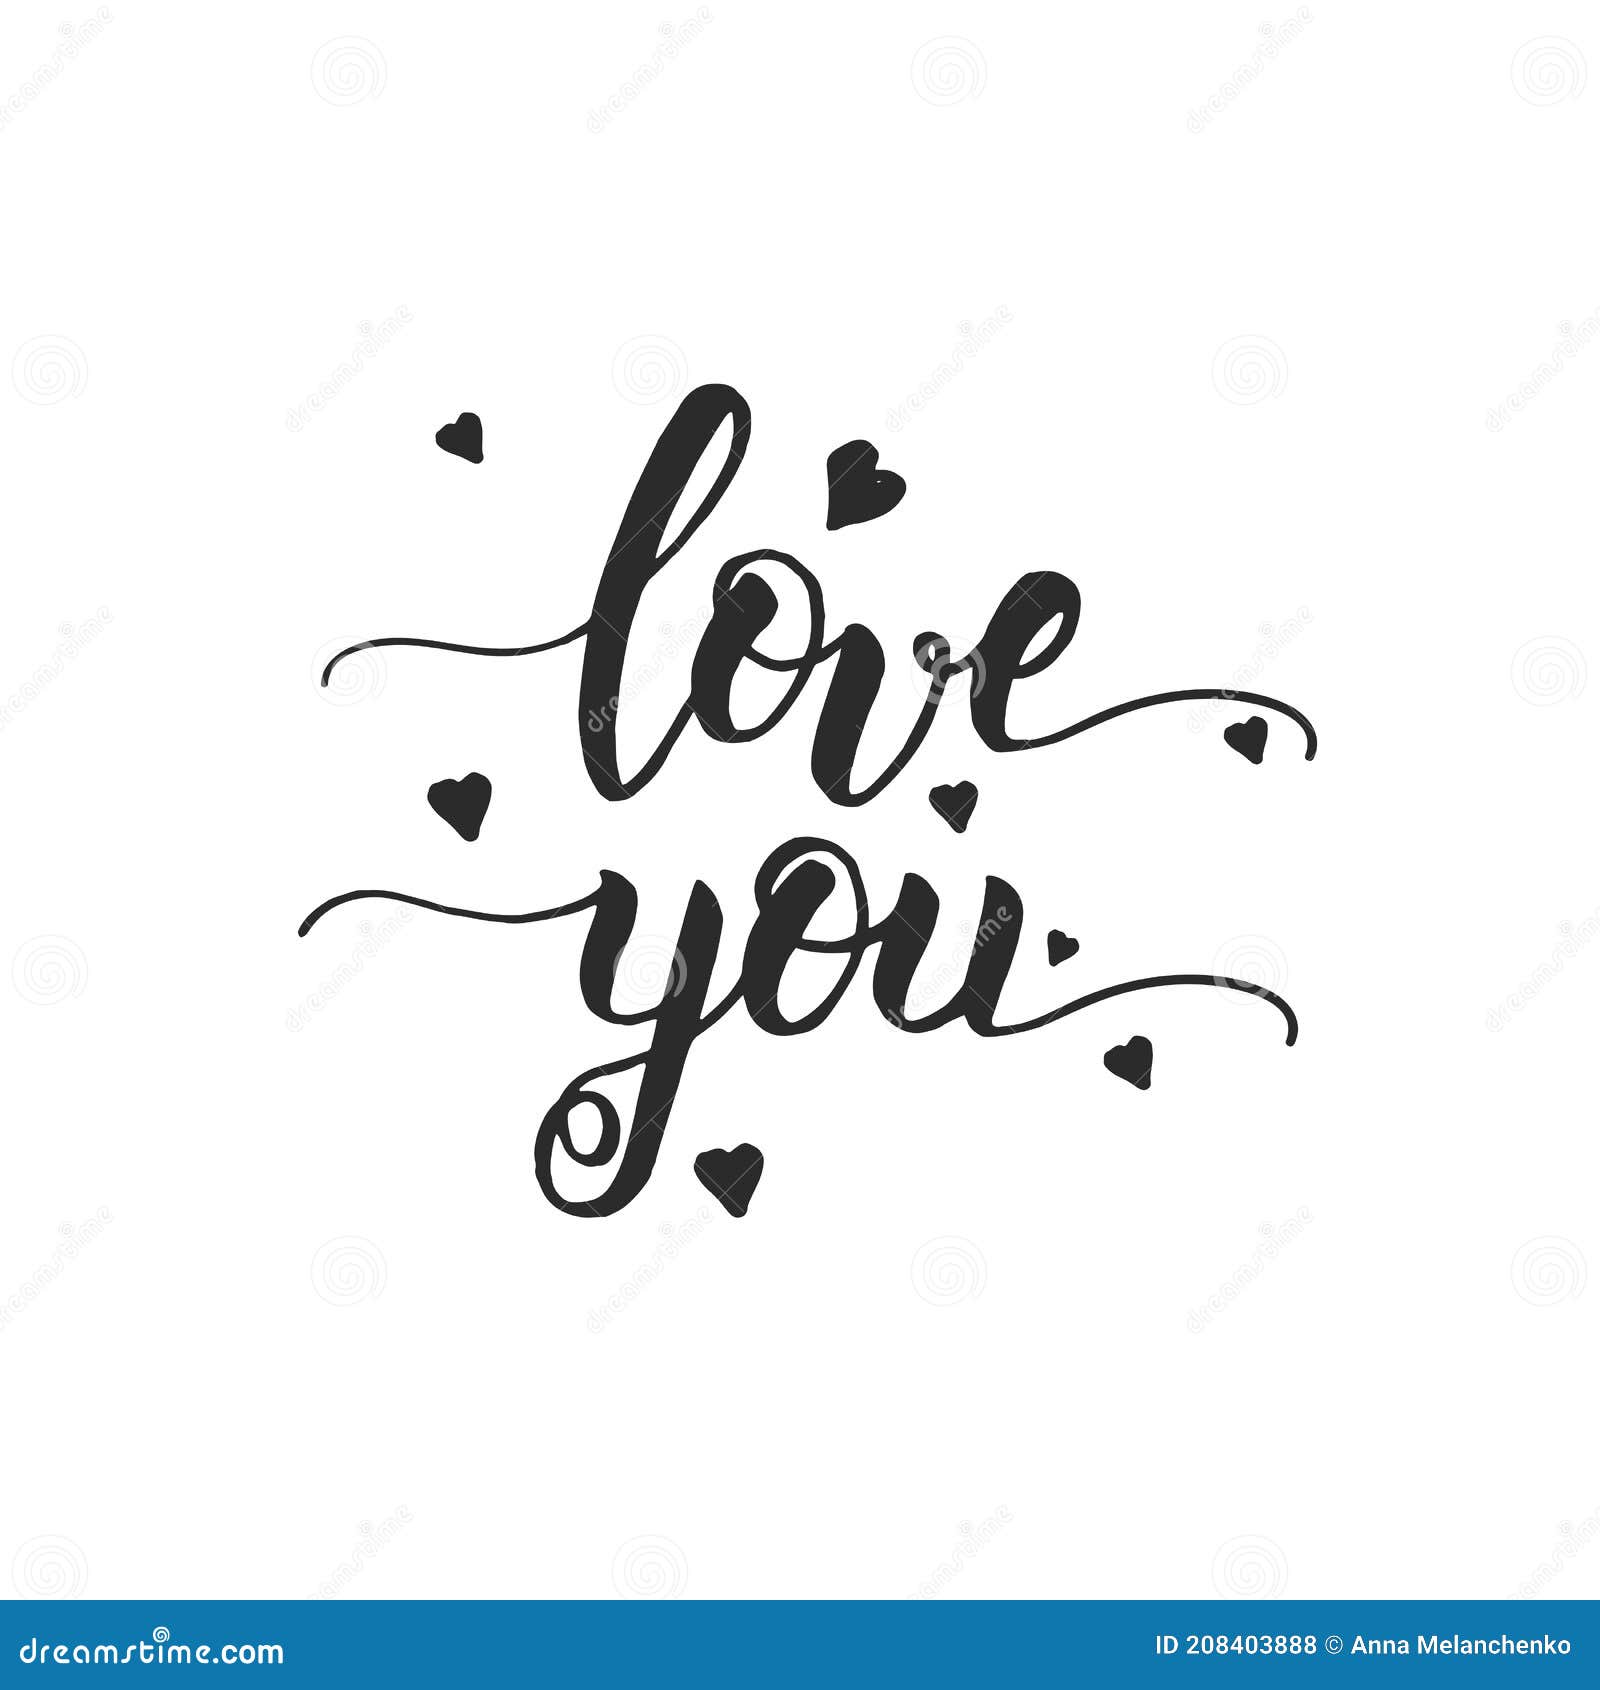 love you - handwritting inspirational and motivational quote with heart  on white. lettering calligraphy phrase. happy